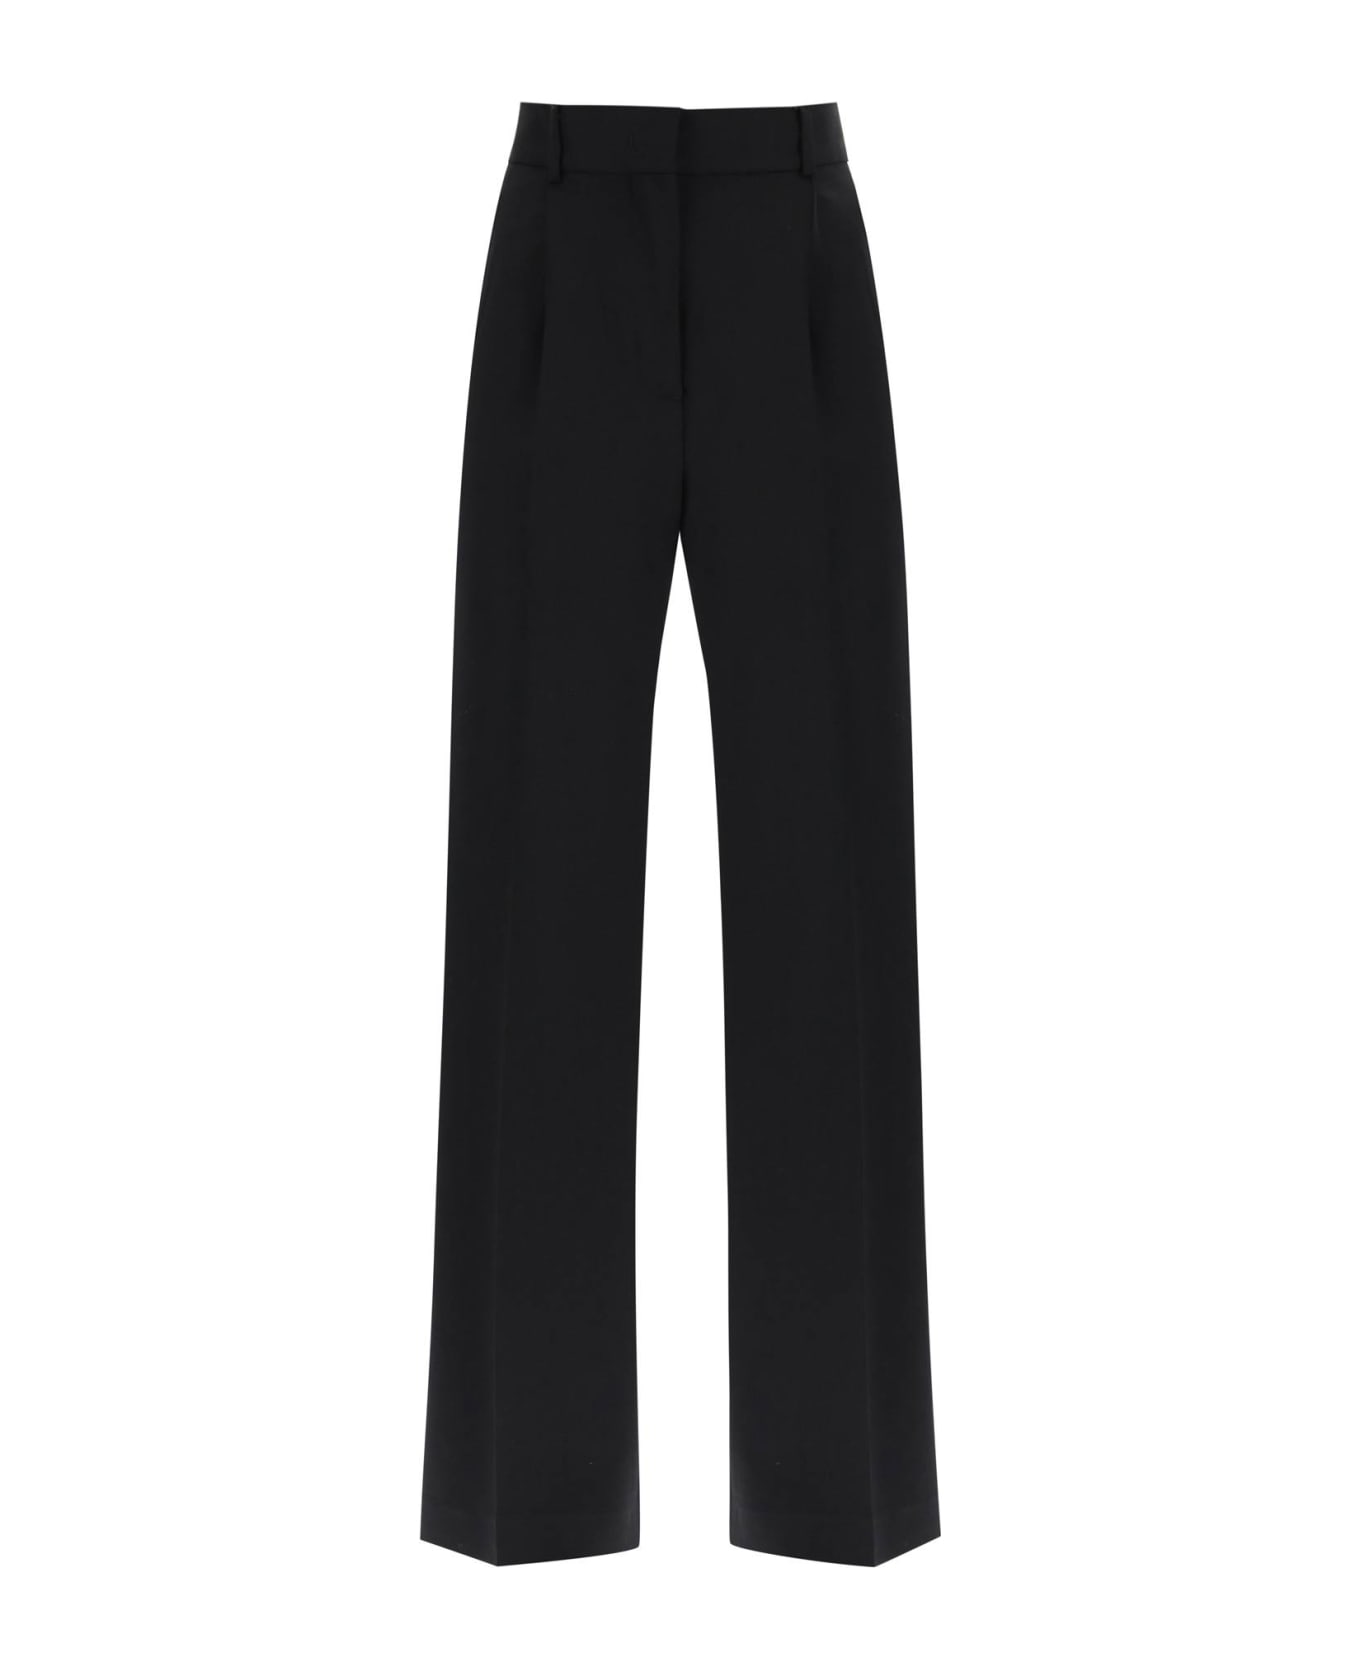 MSGM Tailoring Pants With Wide Leg - Black ボトムス